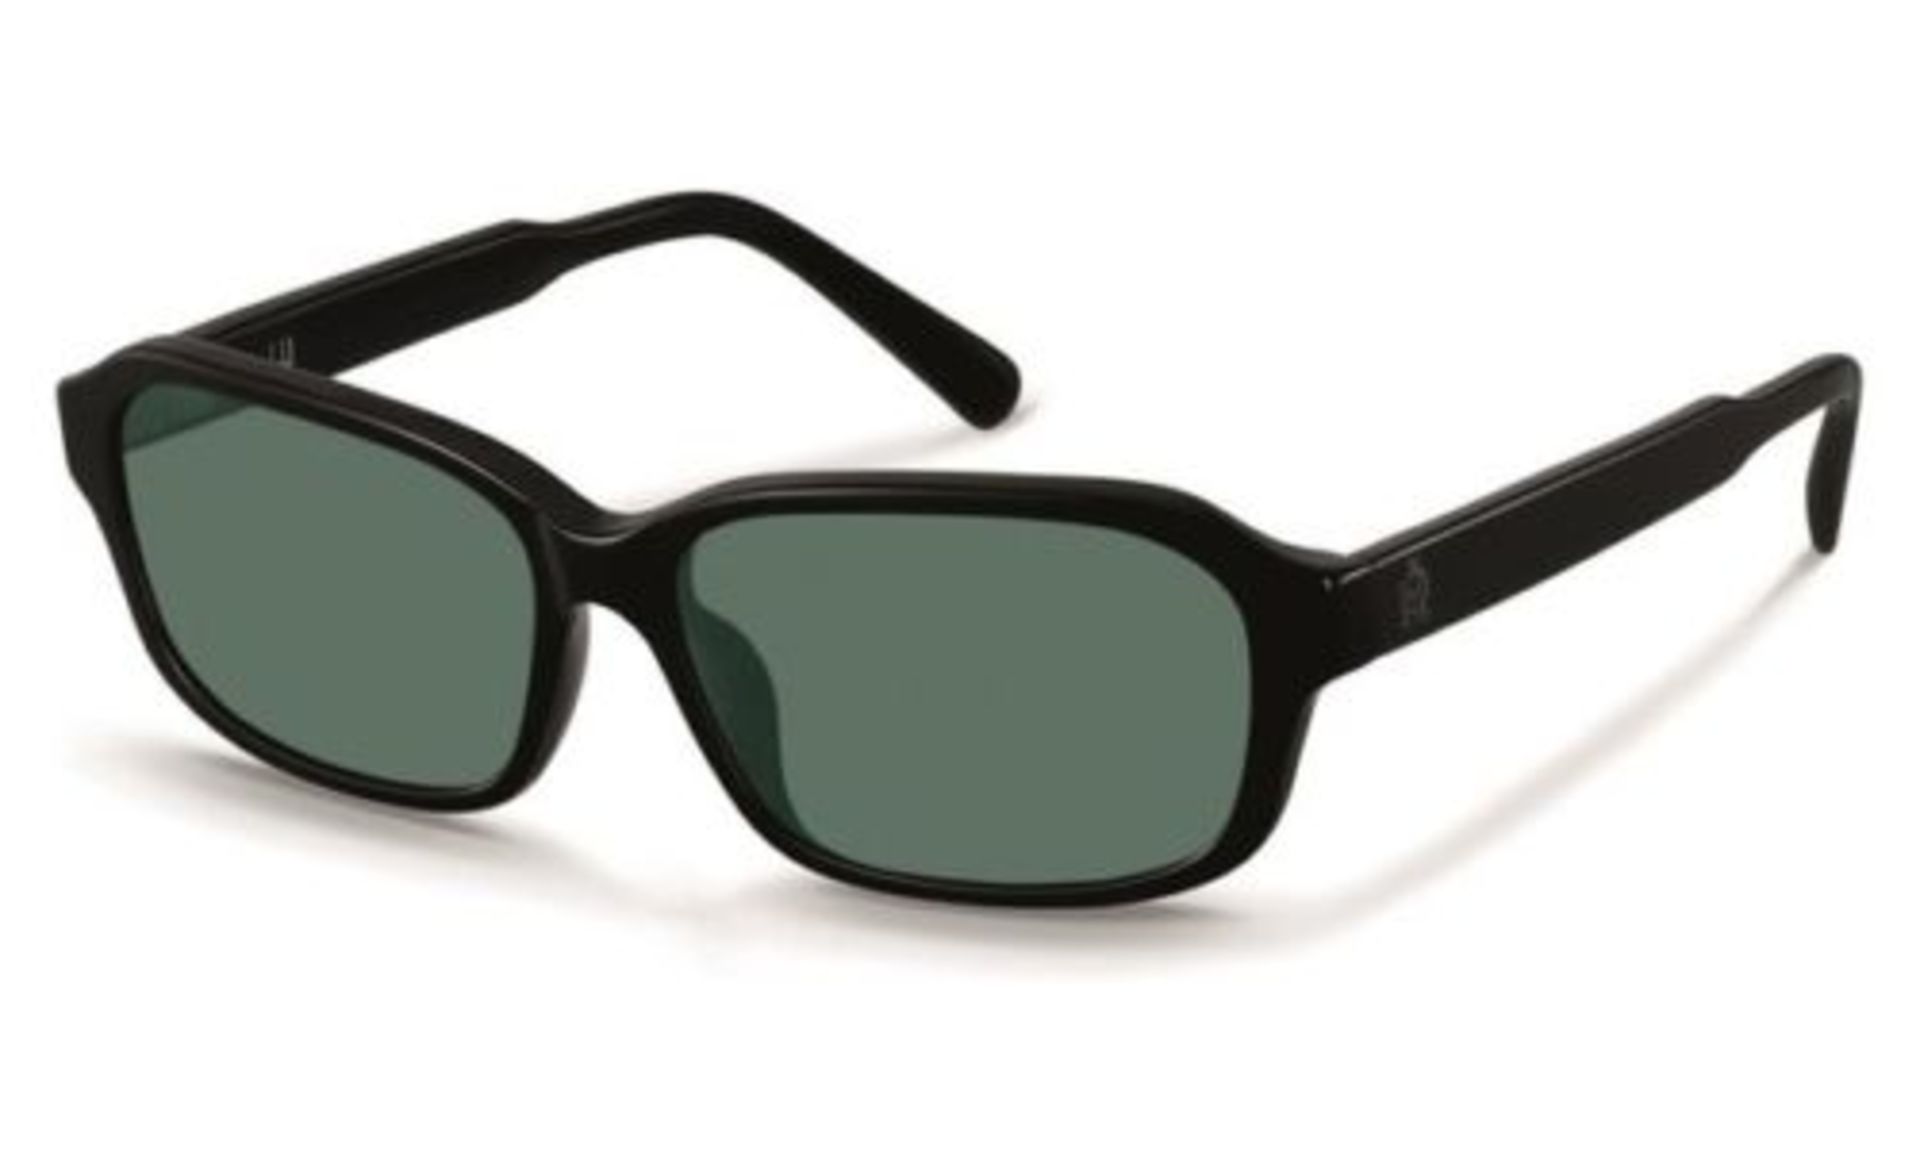 Brand New Pair Of Mens Dunhill Sunglasses - Black Plastic Frame with Green Lens RRP: £179.99 D7002-